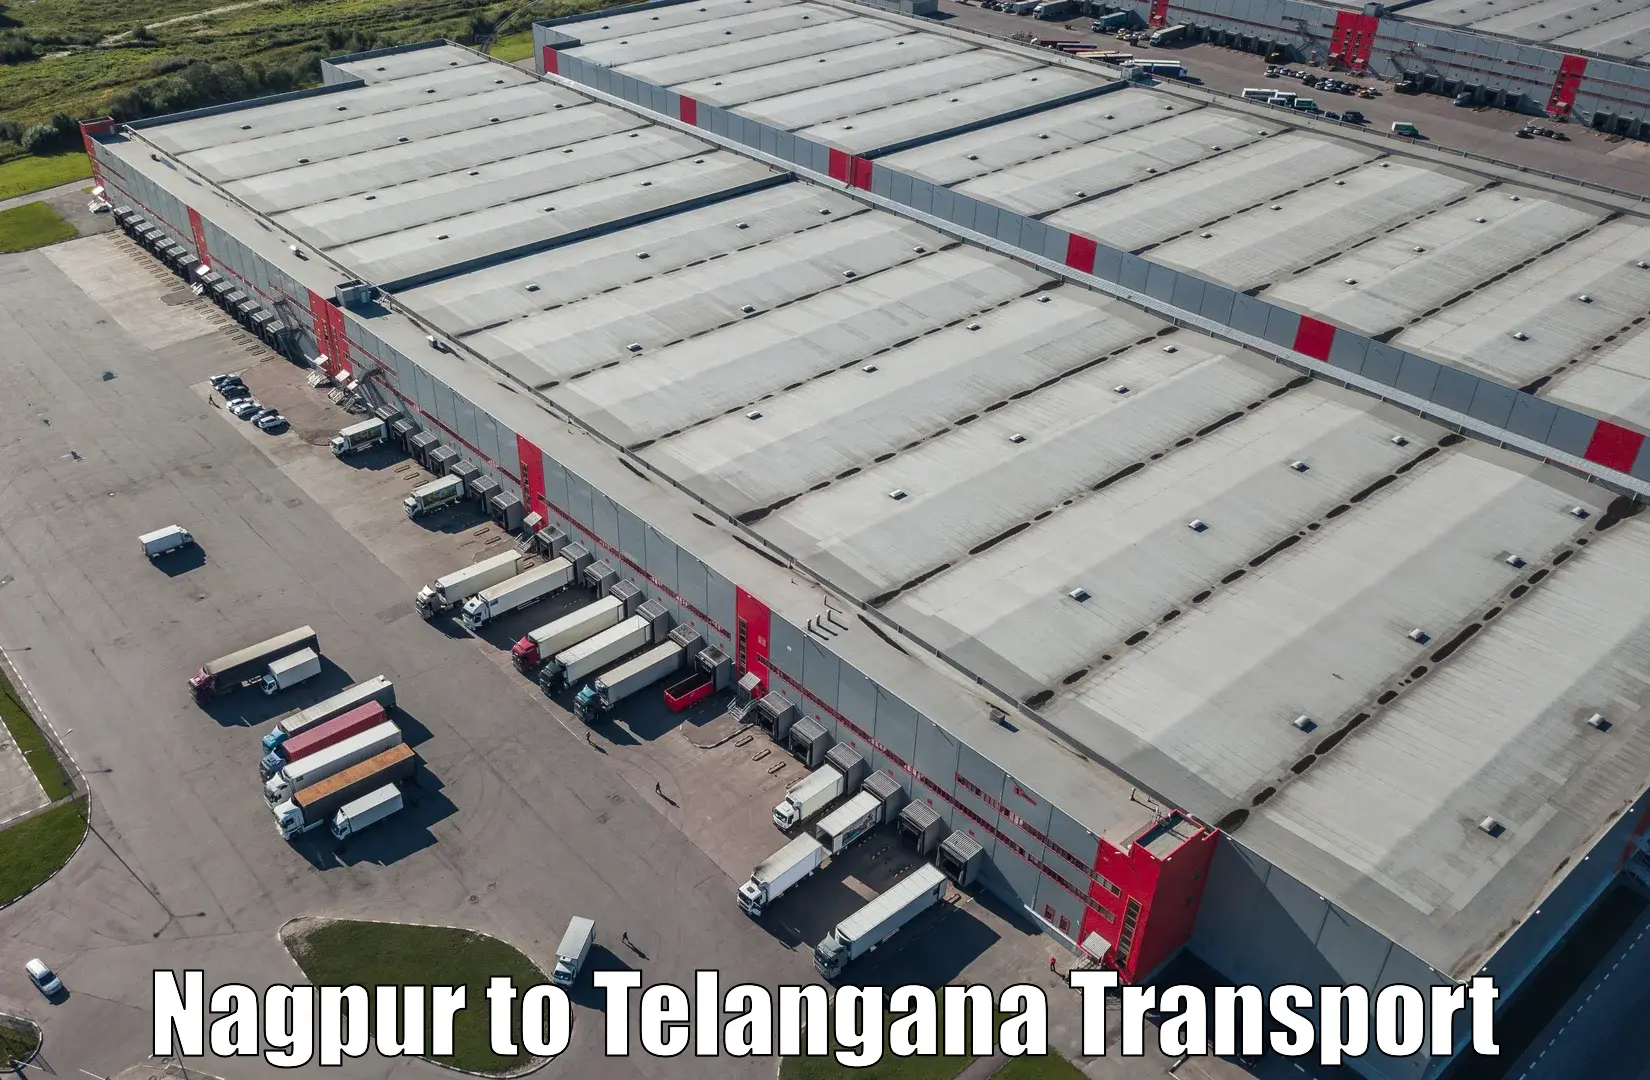 Air freight transport services in Nagpur to Manneguda